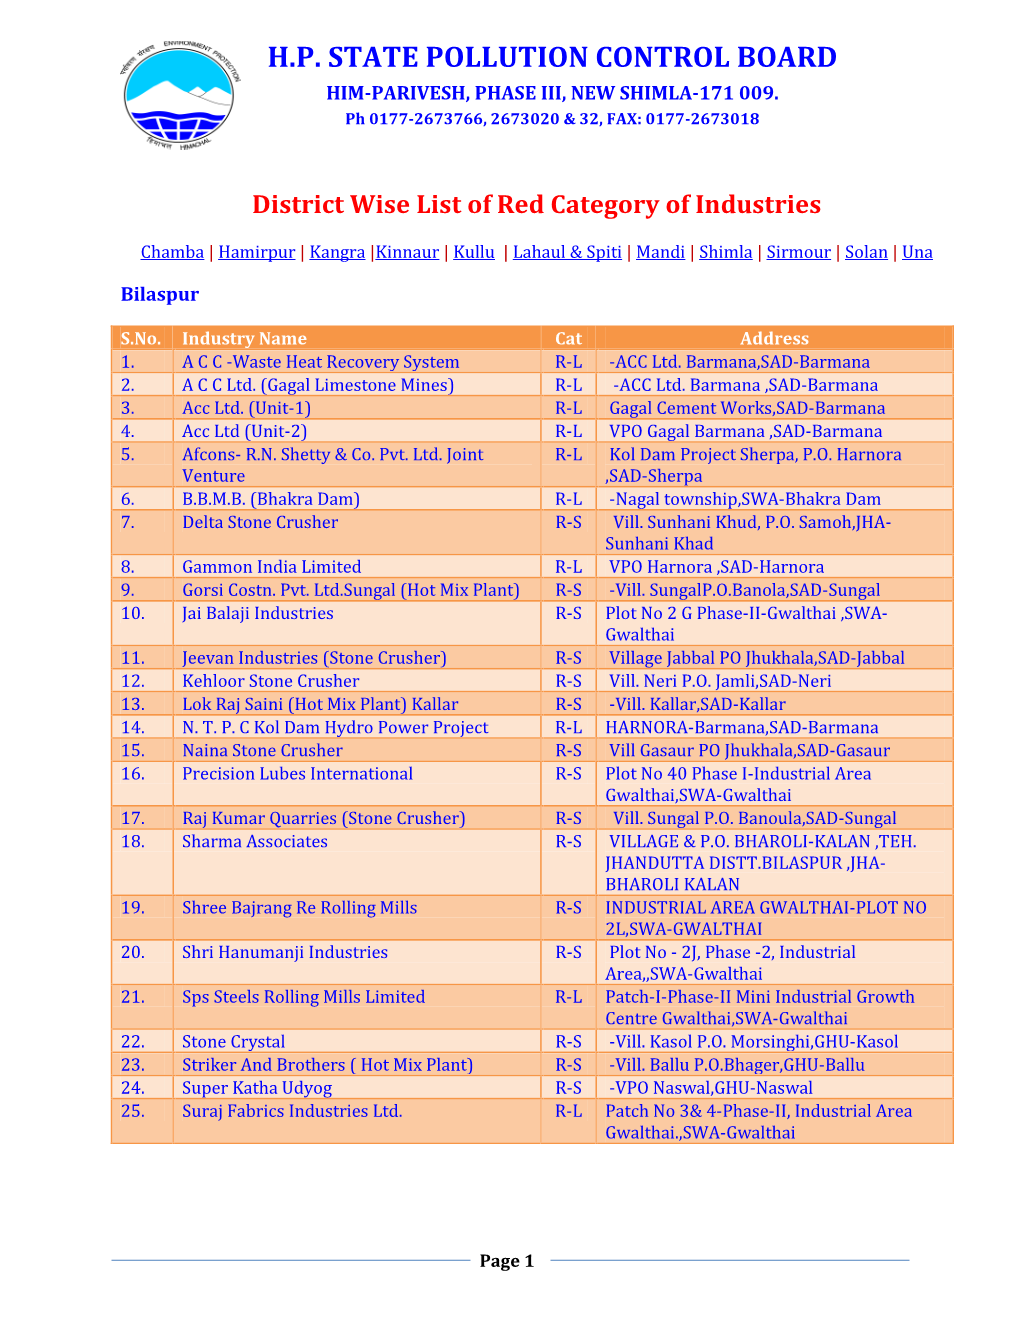 List of Red Category of Industries